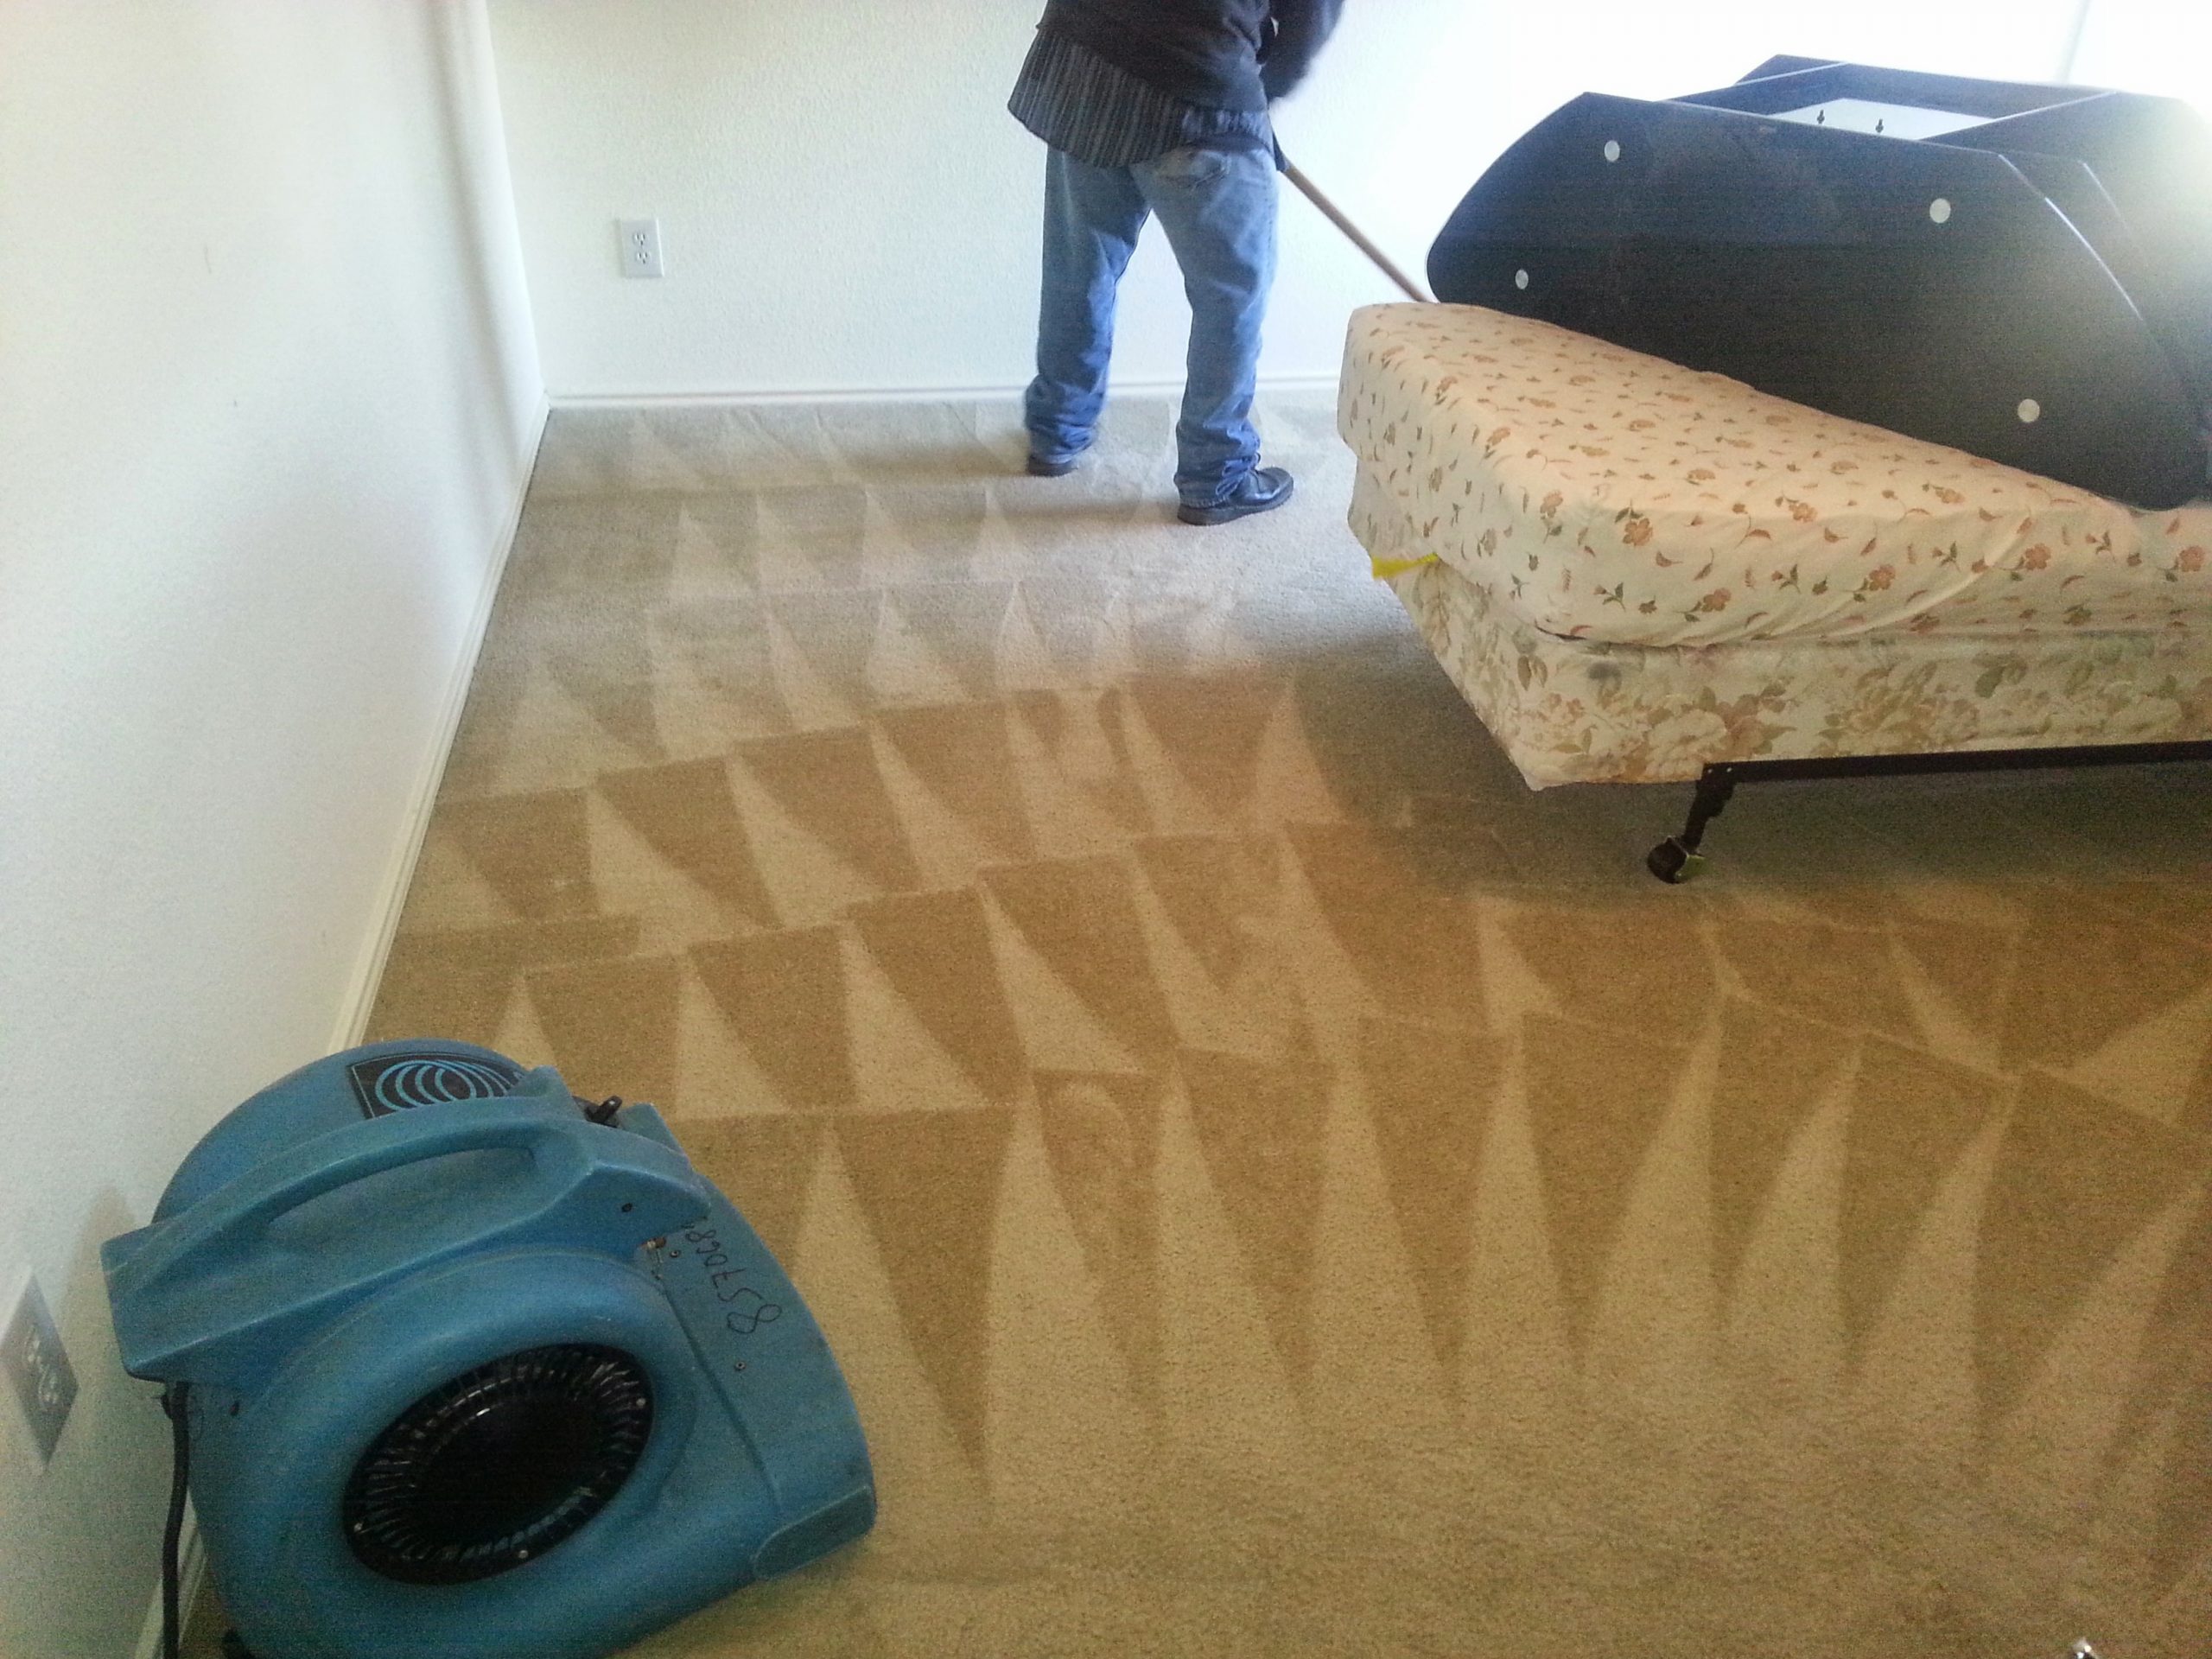 Best Carpet Cleaning Experts, We Know Carpet Cleaning - San Antonio, TX